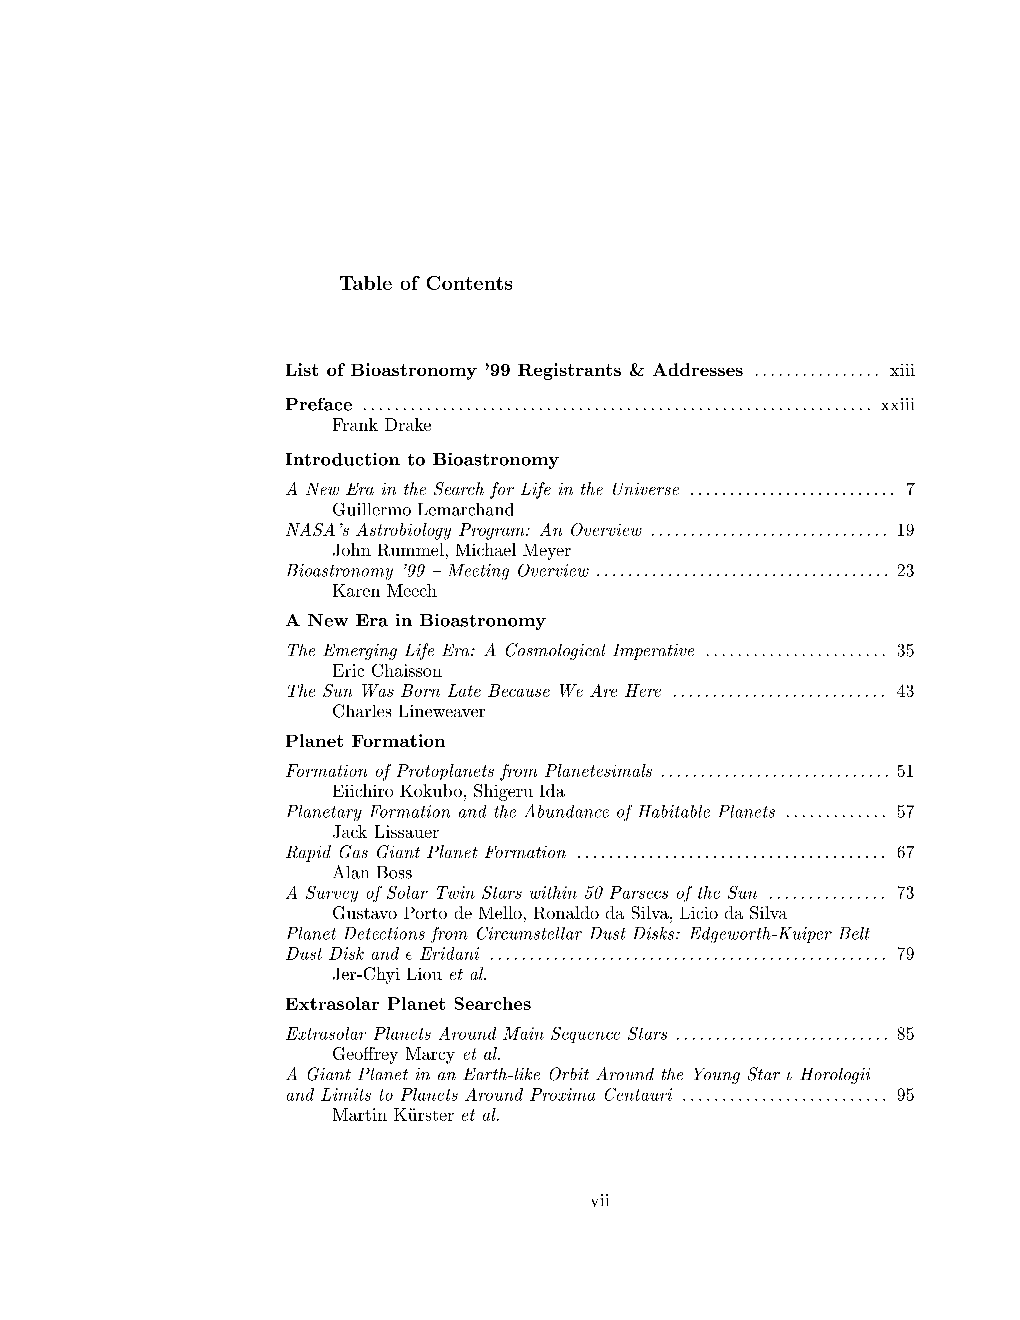 Table of Contents (Pdf)